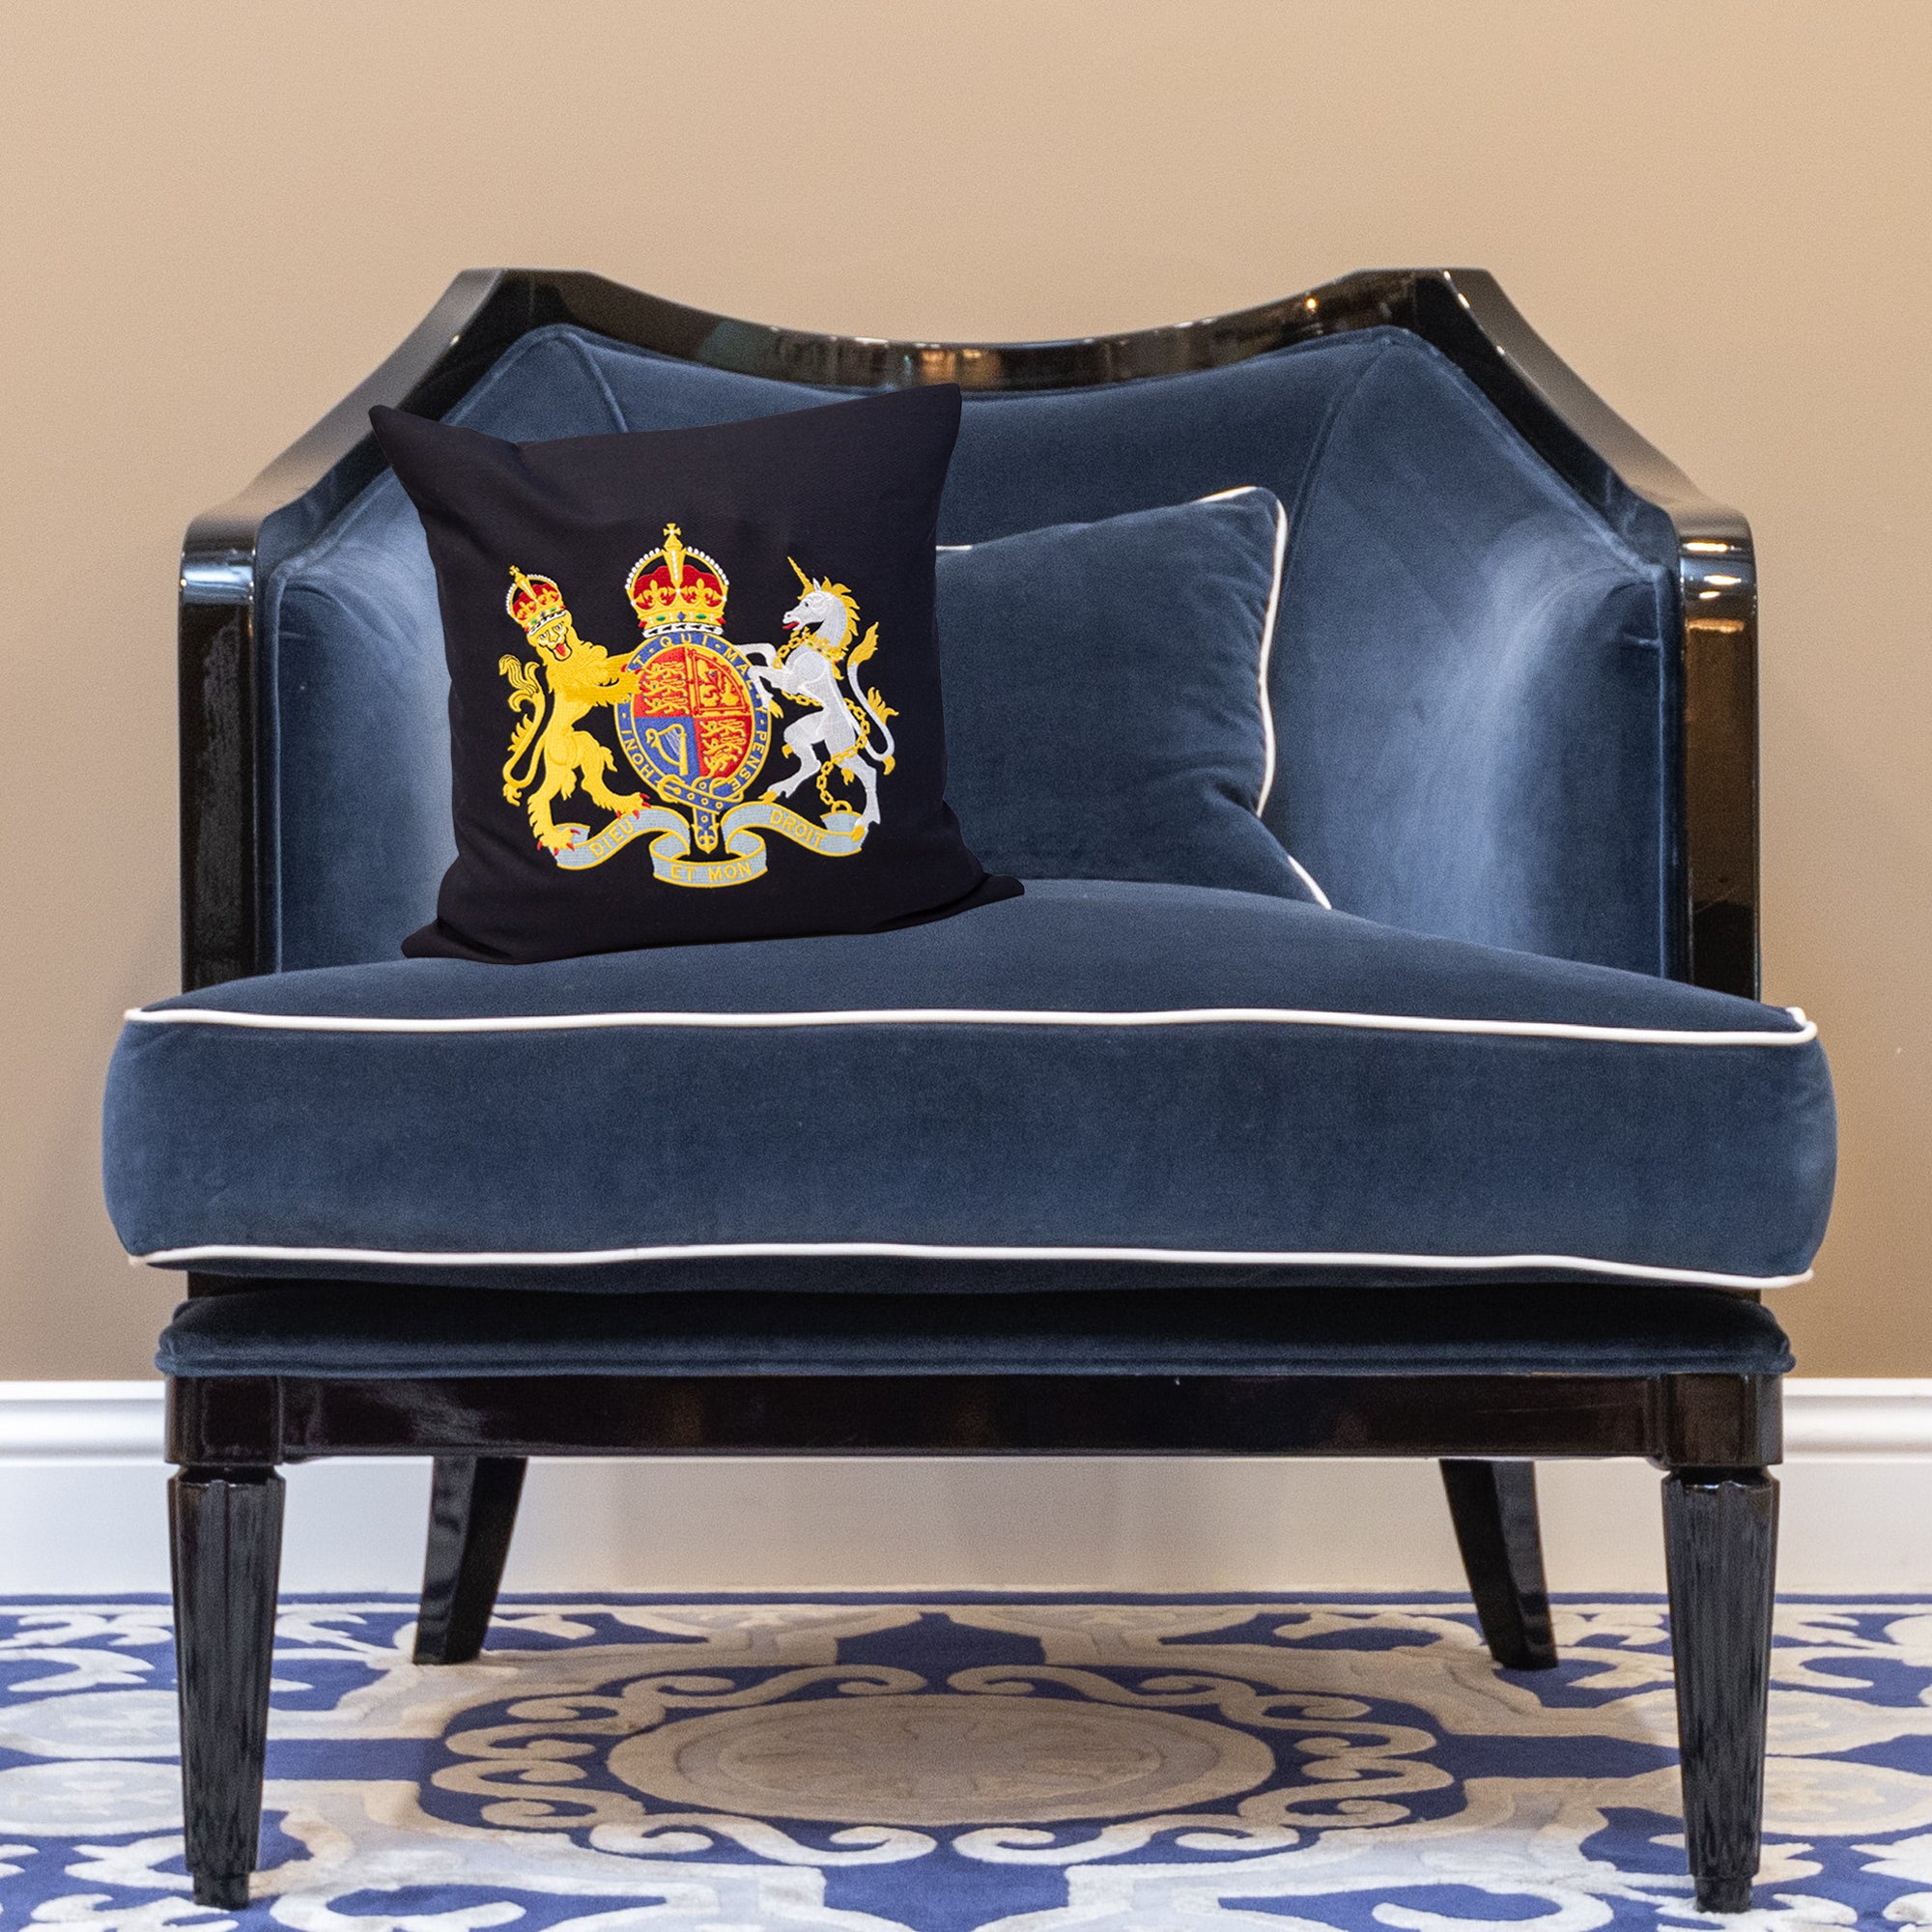 Lieutenancy and Royal Coat of Arms with Kings Crown - Machine Embroidered Cushion Cover